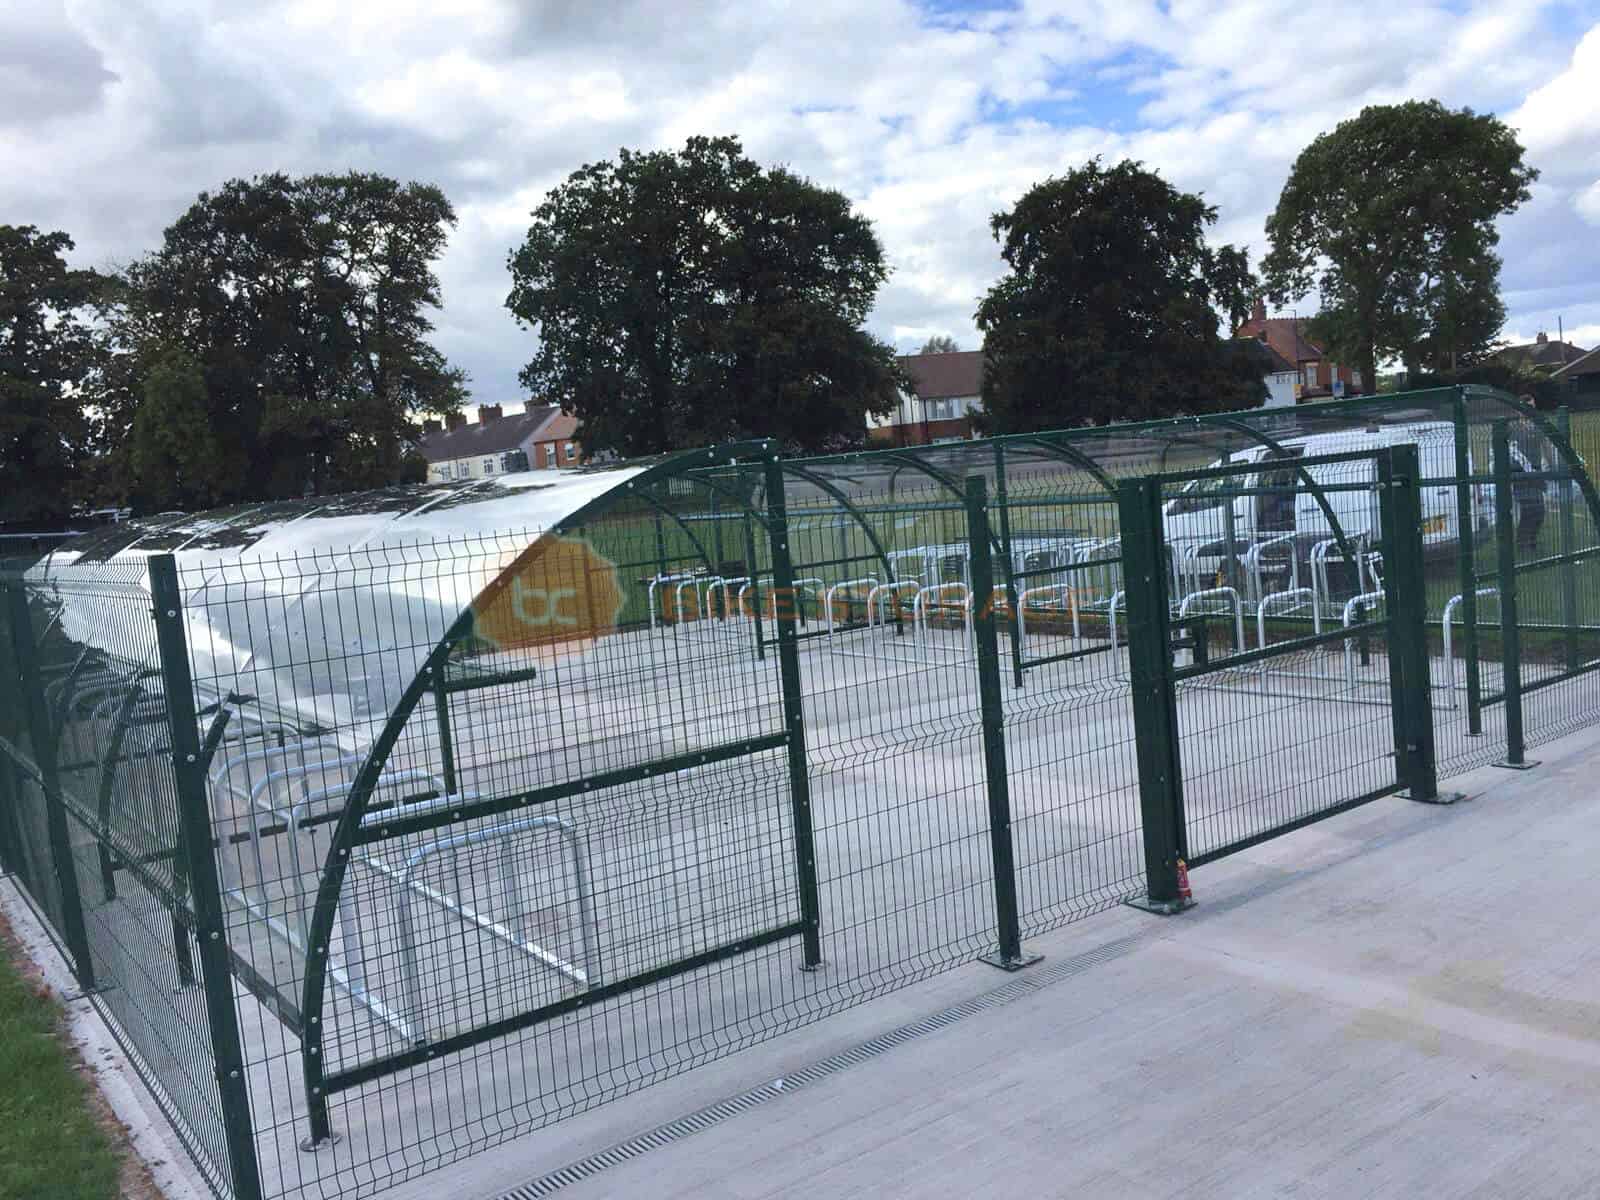 Paladin mesh fencing used to create a secure perimetre for an external bike parking zone